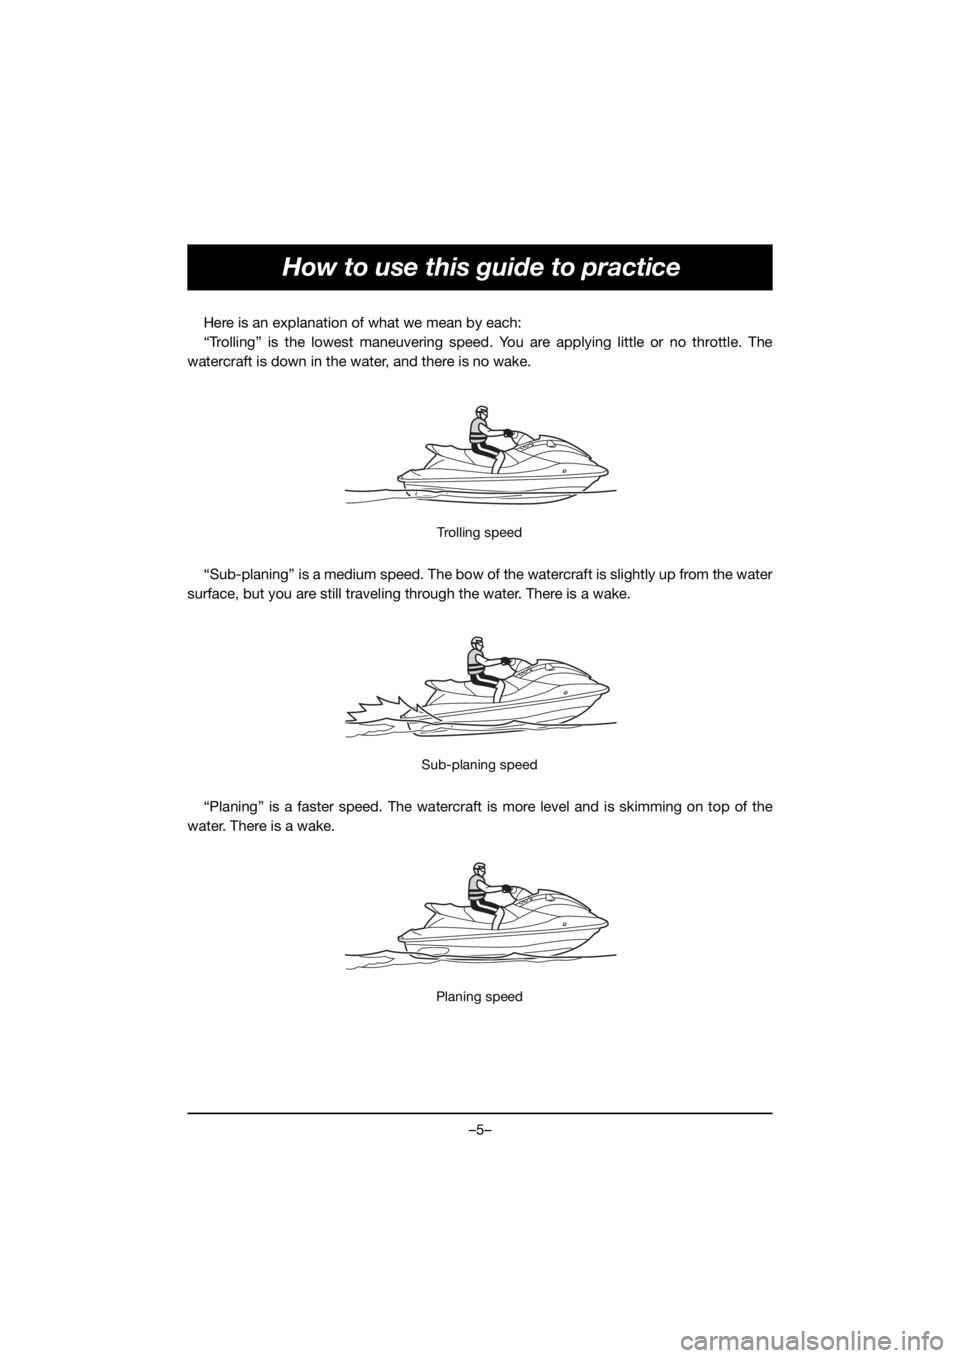 YAMAHA VX DELUXE 2021  Notices Demploi (in French) –5–
How to use this guide to practice
Here is an explanation of what we mean by each:
“Trolling” is the lowest maneuvering speed. You are applying little or no throttle. The
watercraft is down